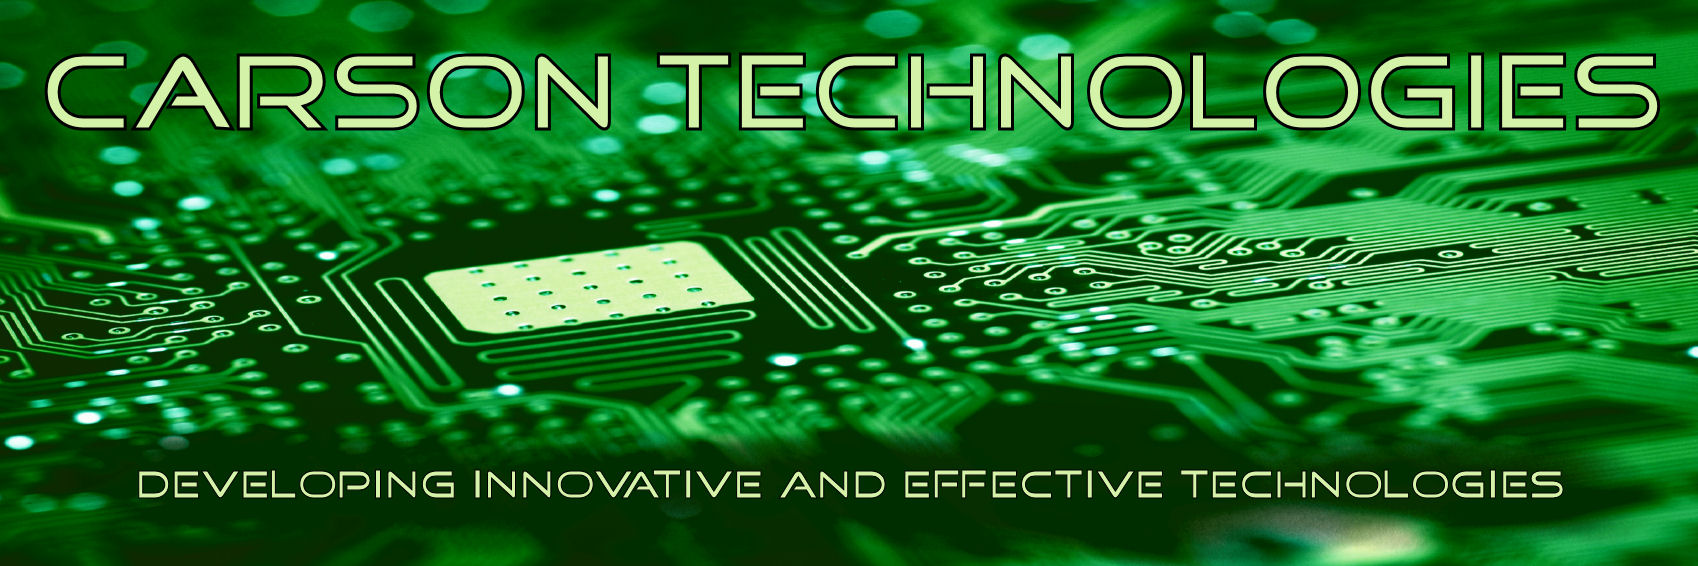 Carson Technologies - Developing Innovative and Effective Technologies